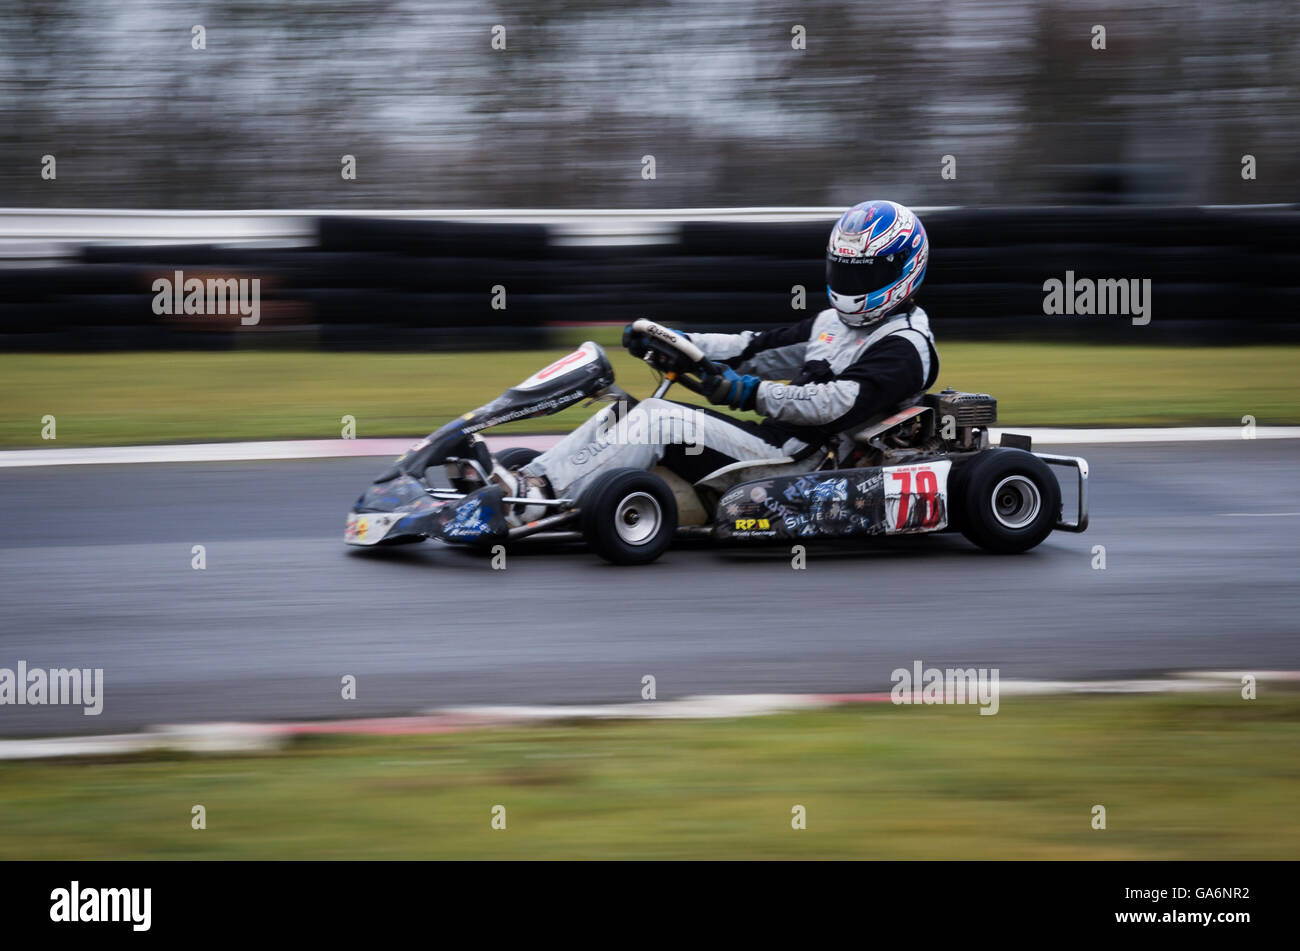 An image taken at slow shutter and panning of a speeding go kart traveling around a circuit. Stock Photo